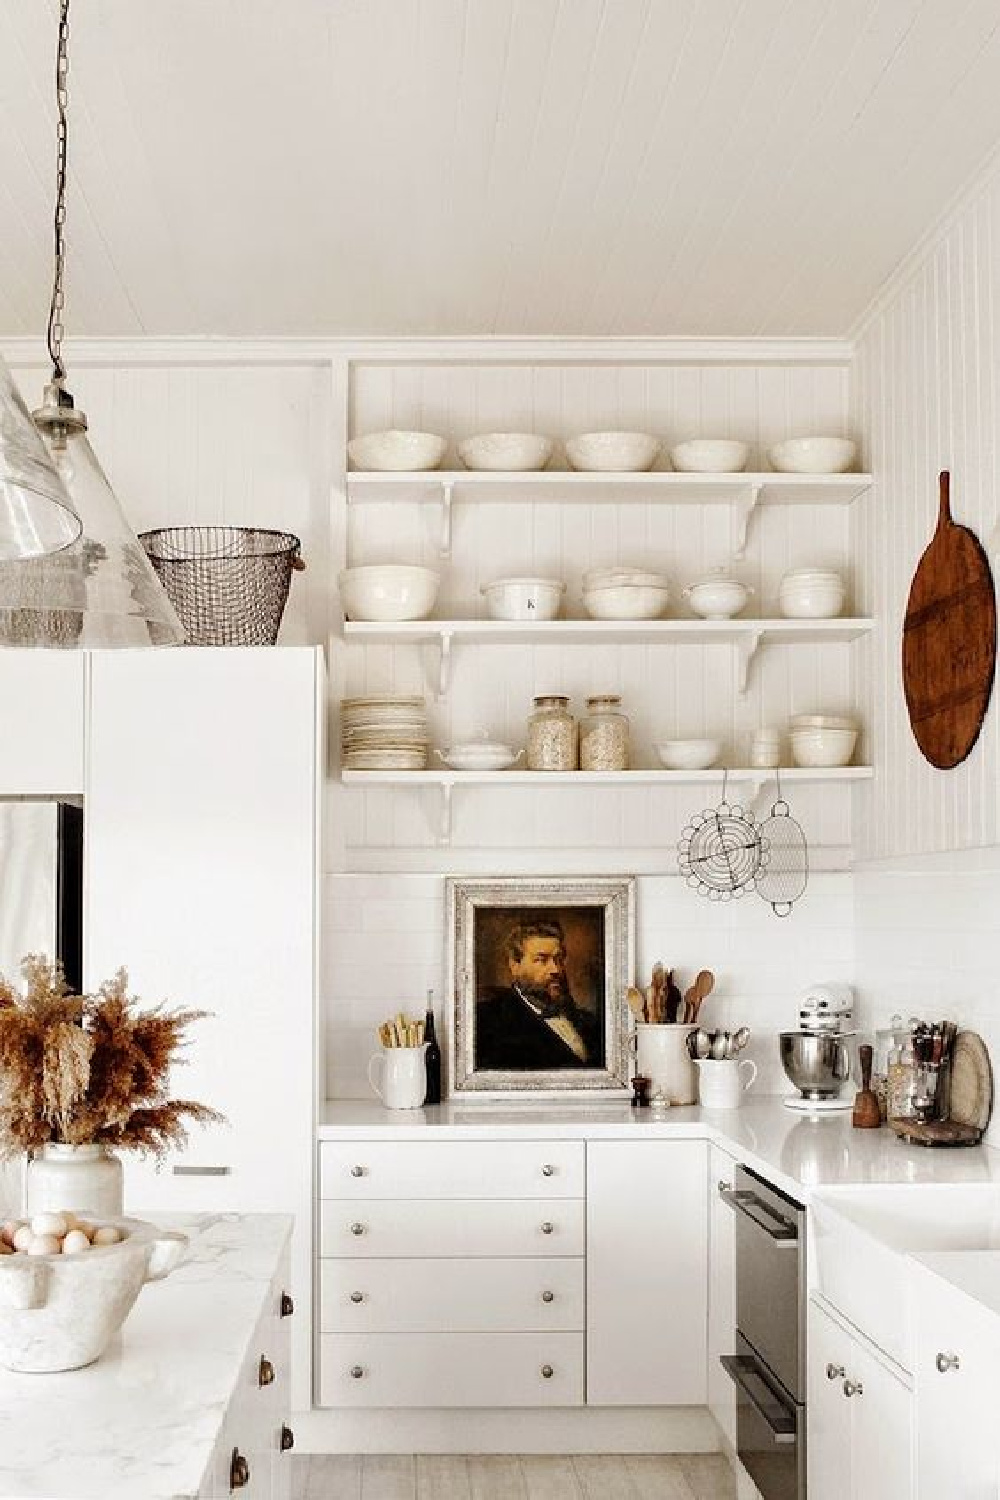 Kara Rosenlund rustic white country kitchen with open shelving and vintage treasures.